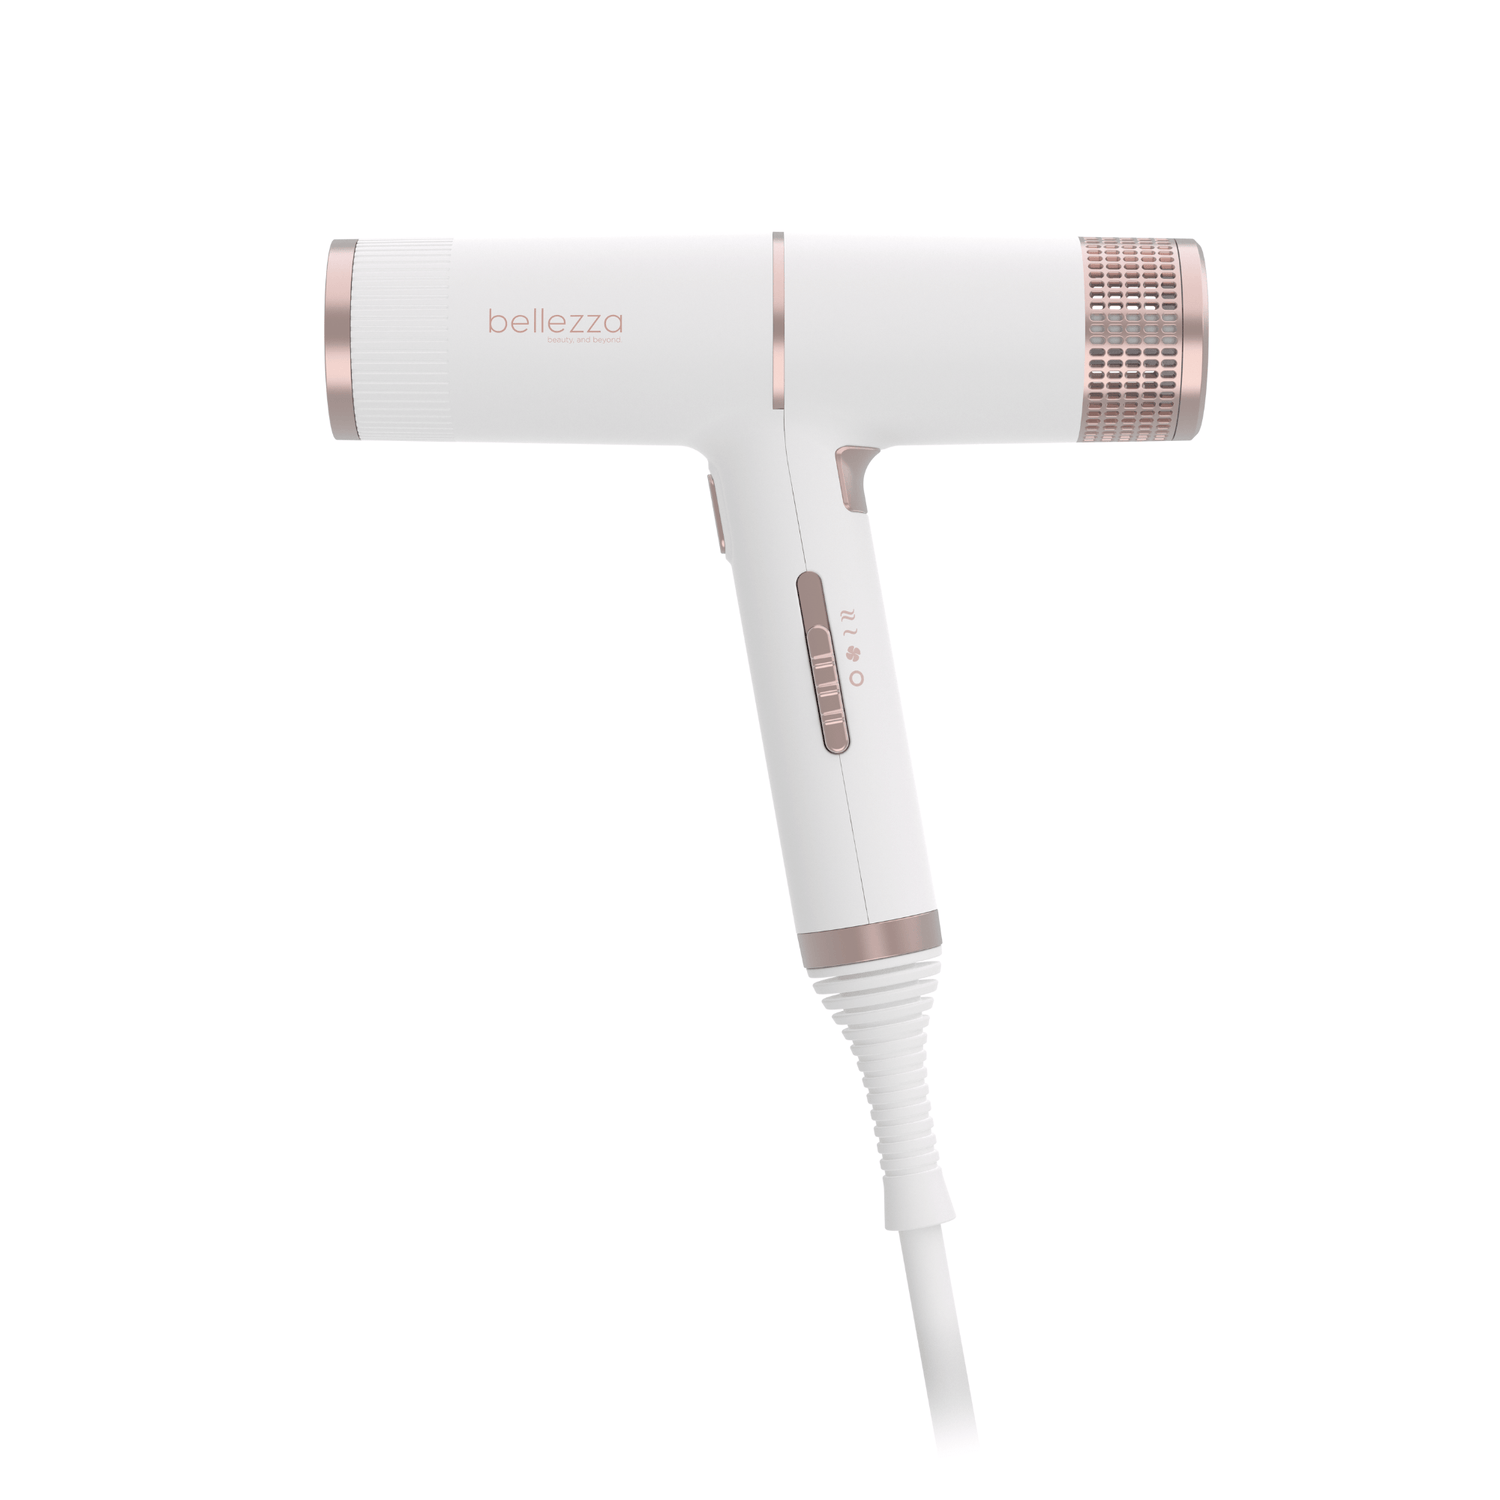 Bellezza White with Rose Gold Ionic Beauty -Blue Ionic Technology for Pro Performance Drying